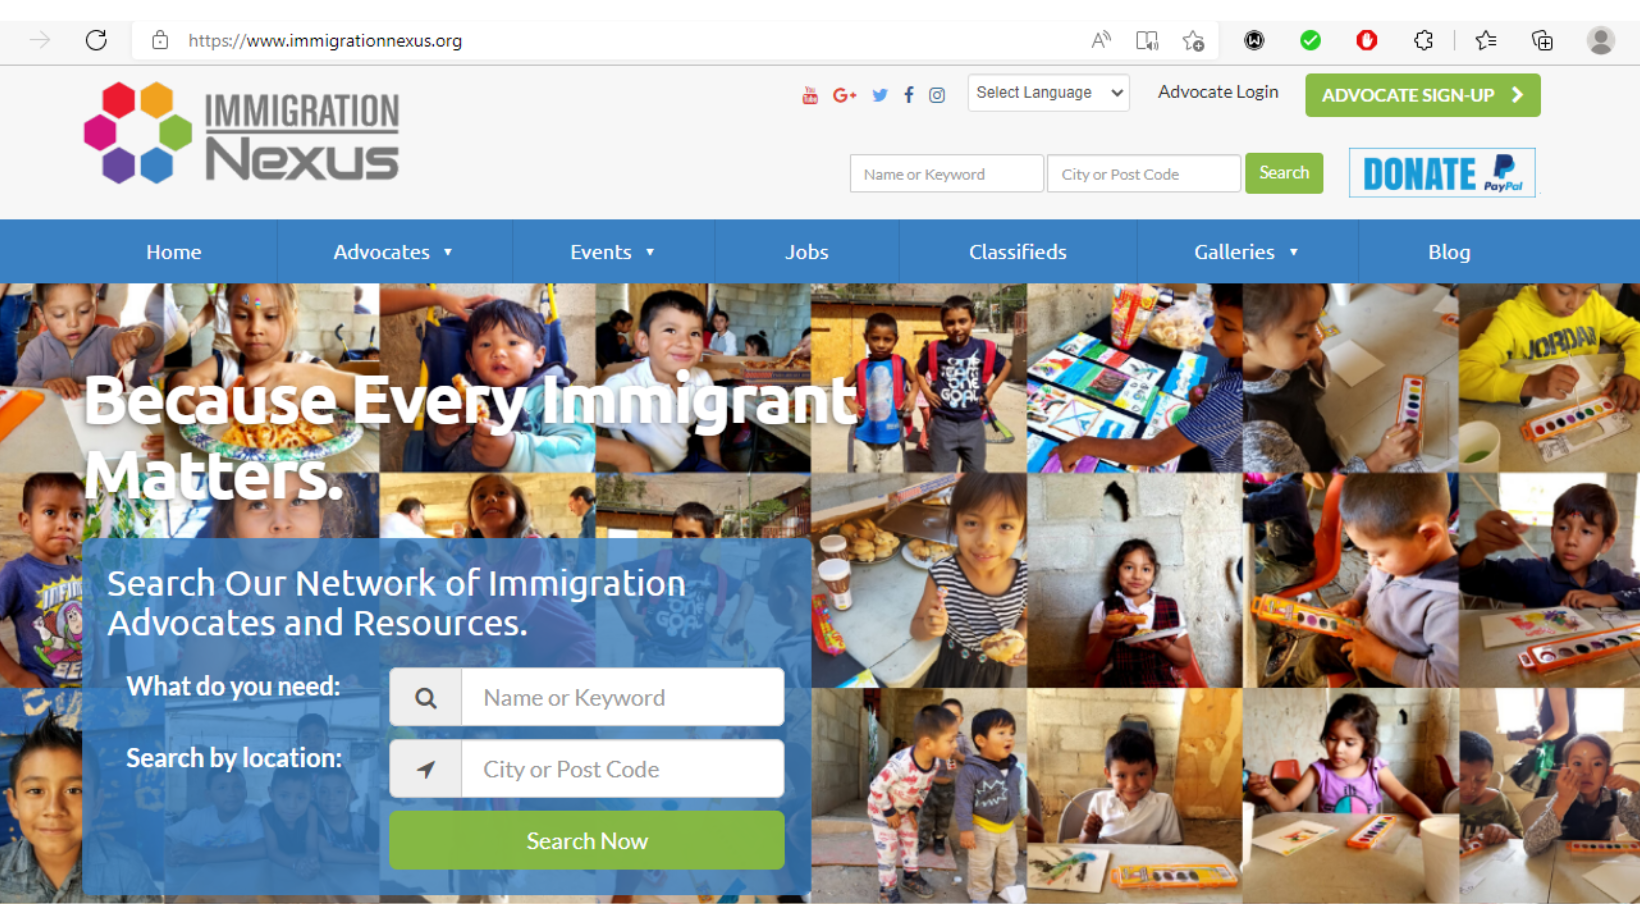 FUNDRAISING CAMPAIGN TO SUPPORT OUR IMMIGRATION NEXUS ONLINE PLATFORM